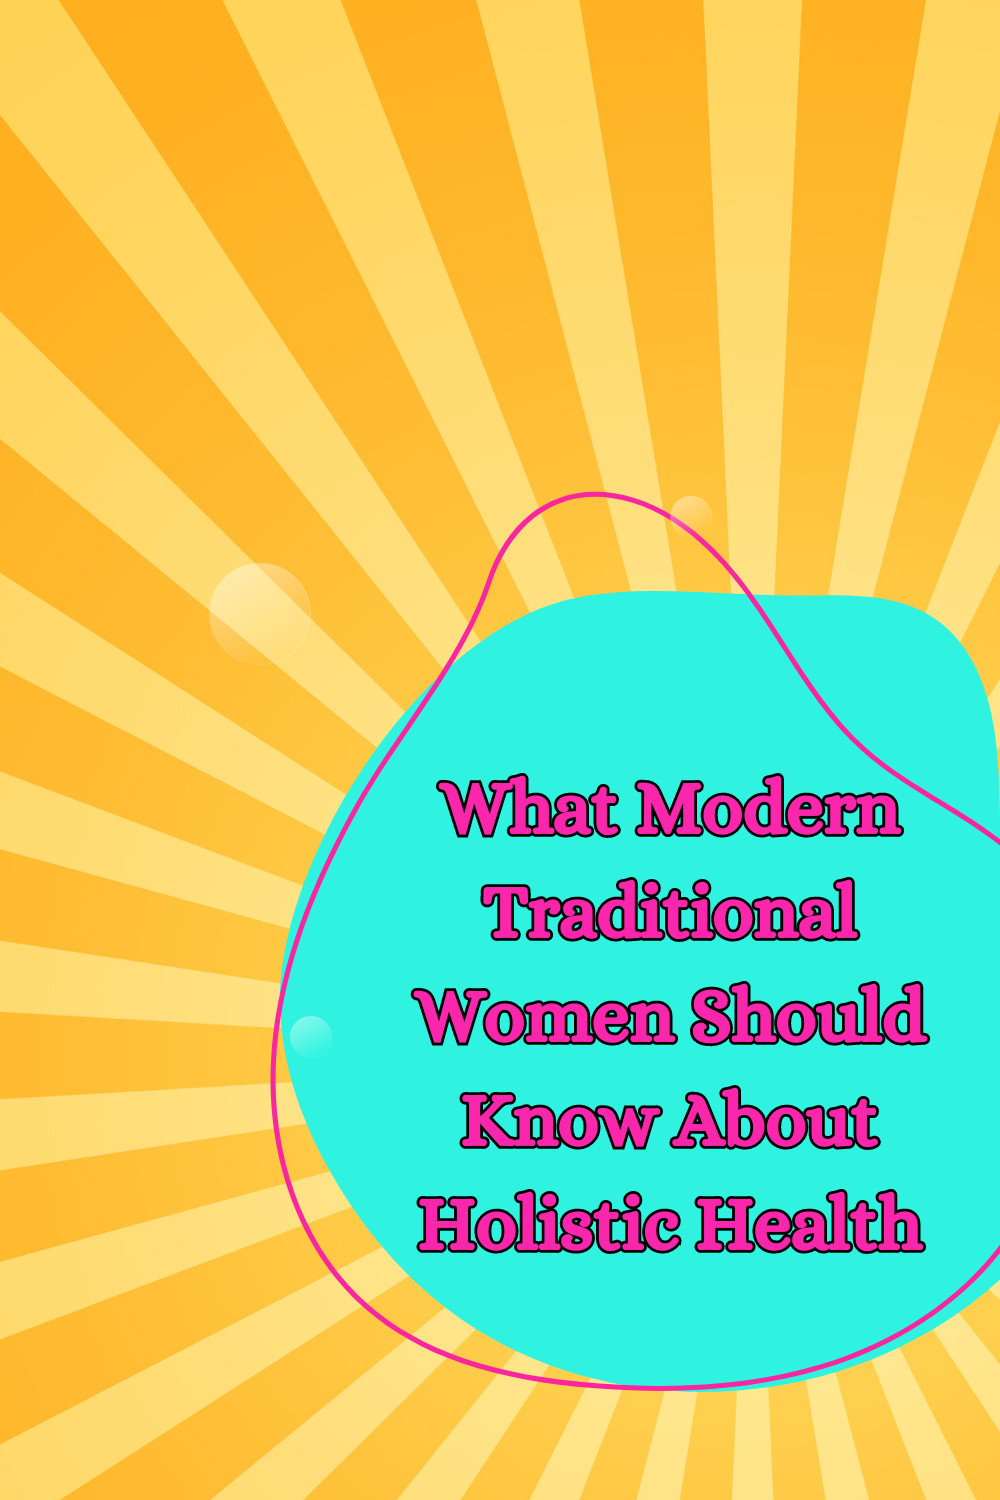 What Modern Traditional Women Should Know About Holistic Health